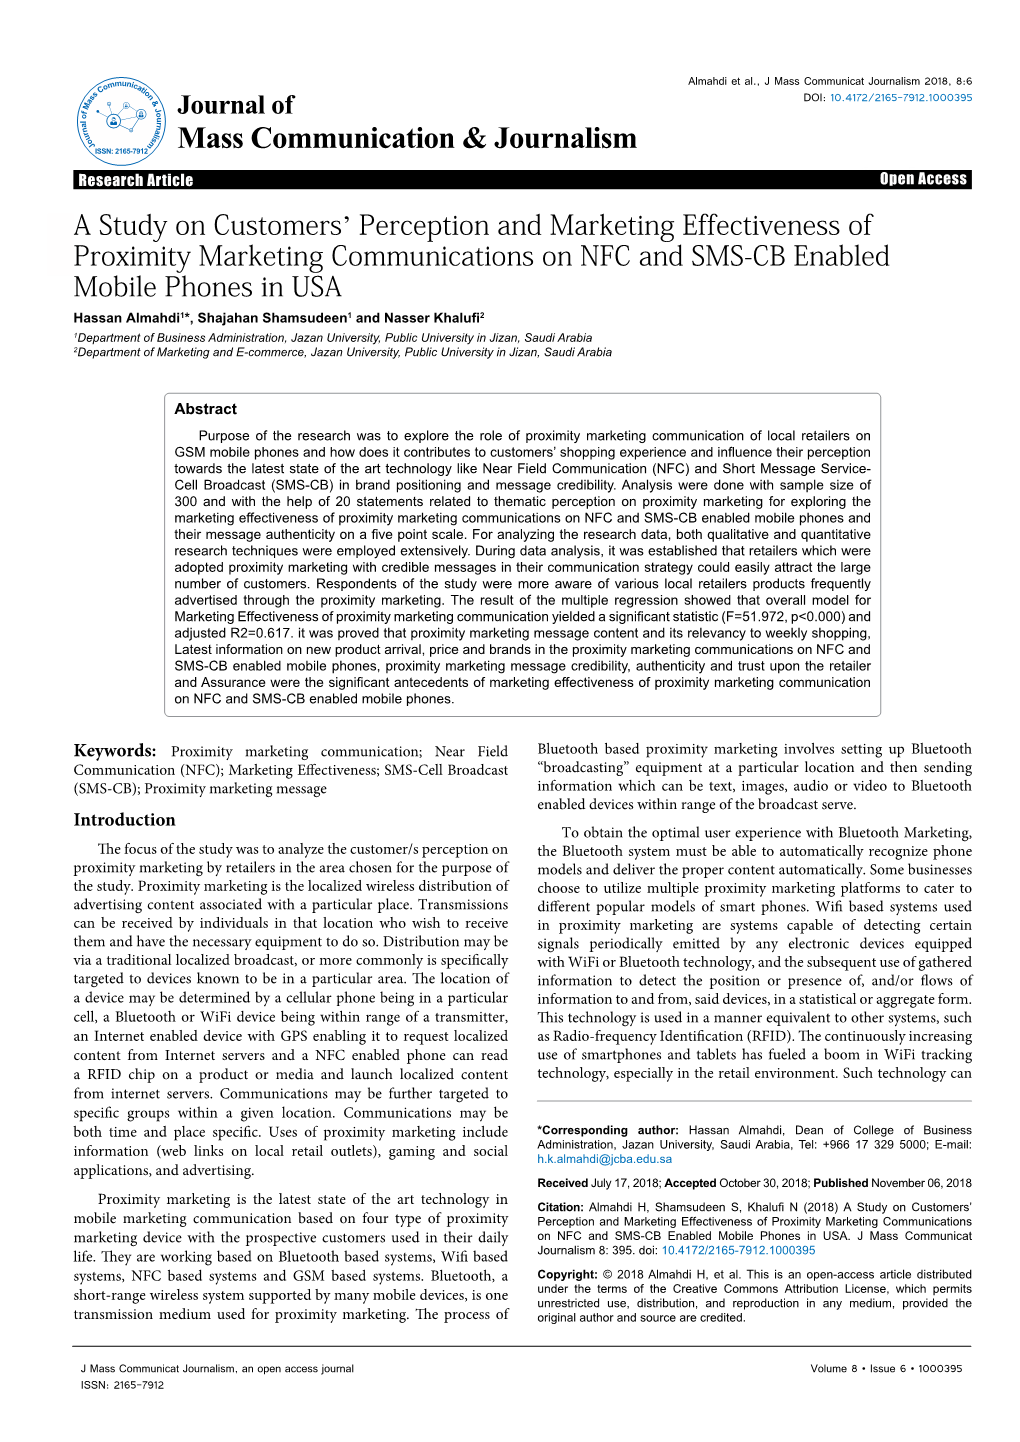 A Study on Customers' Perception and Marketing Effectiveness Of